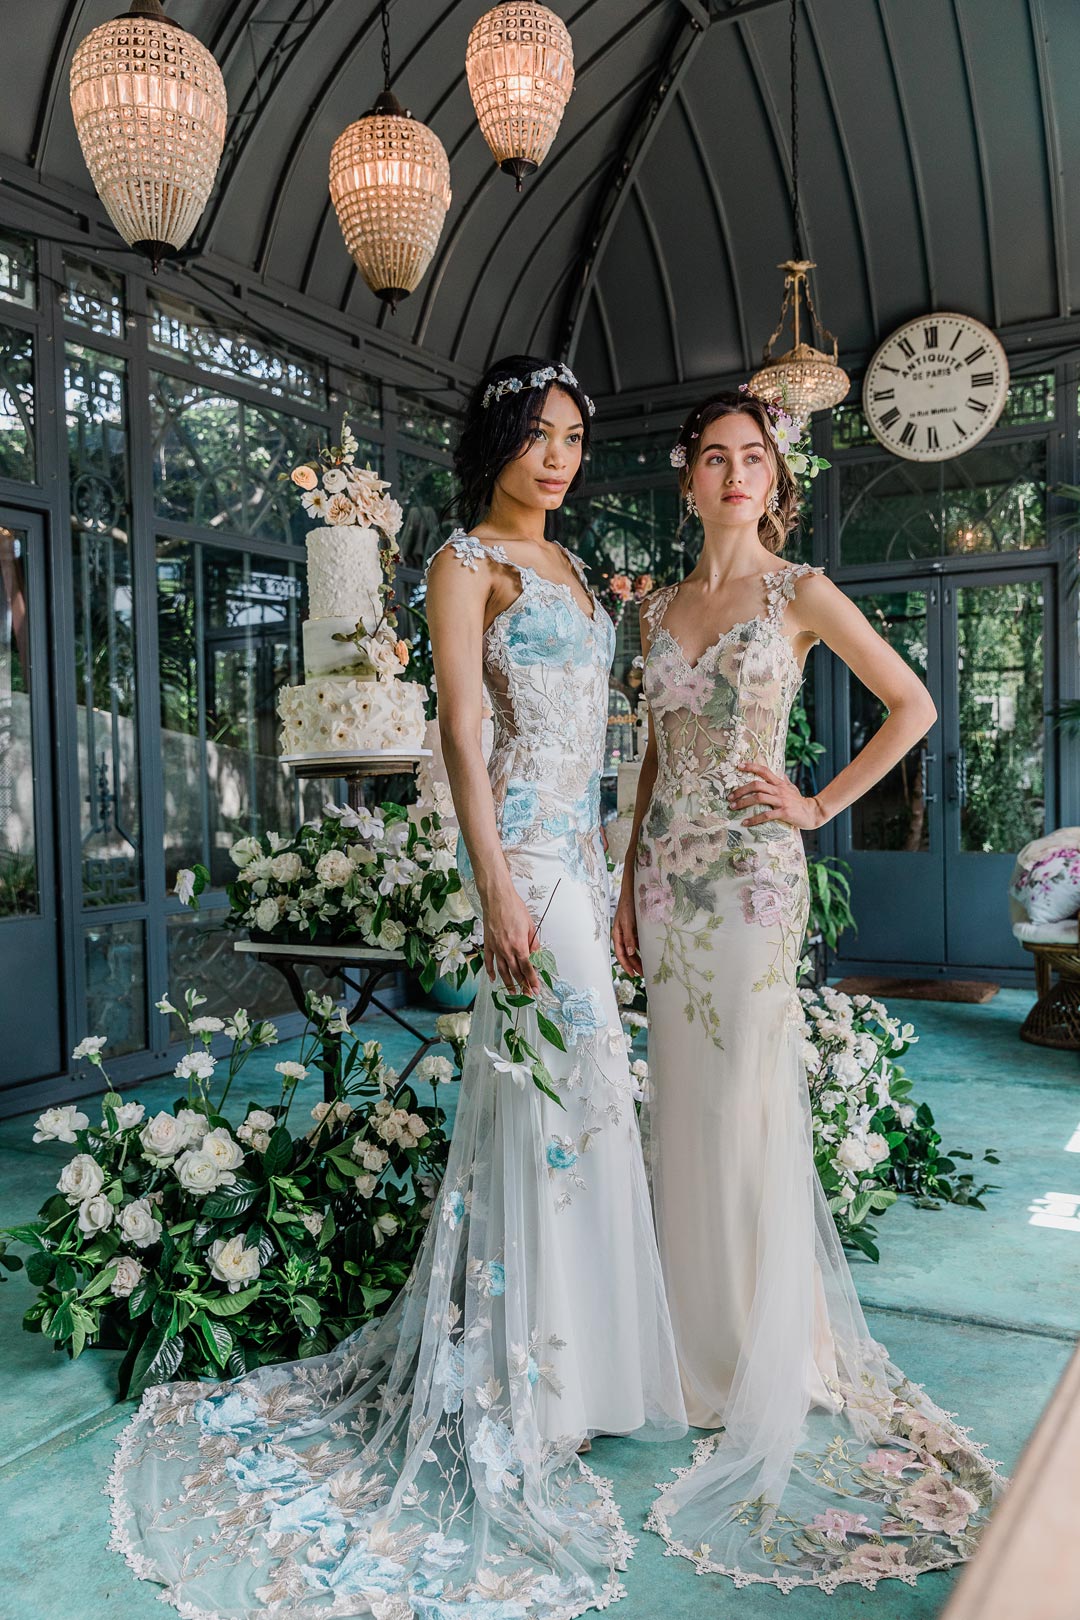 Floral Emboridered Wedding Dresses designed by Claire Pettibone